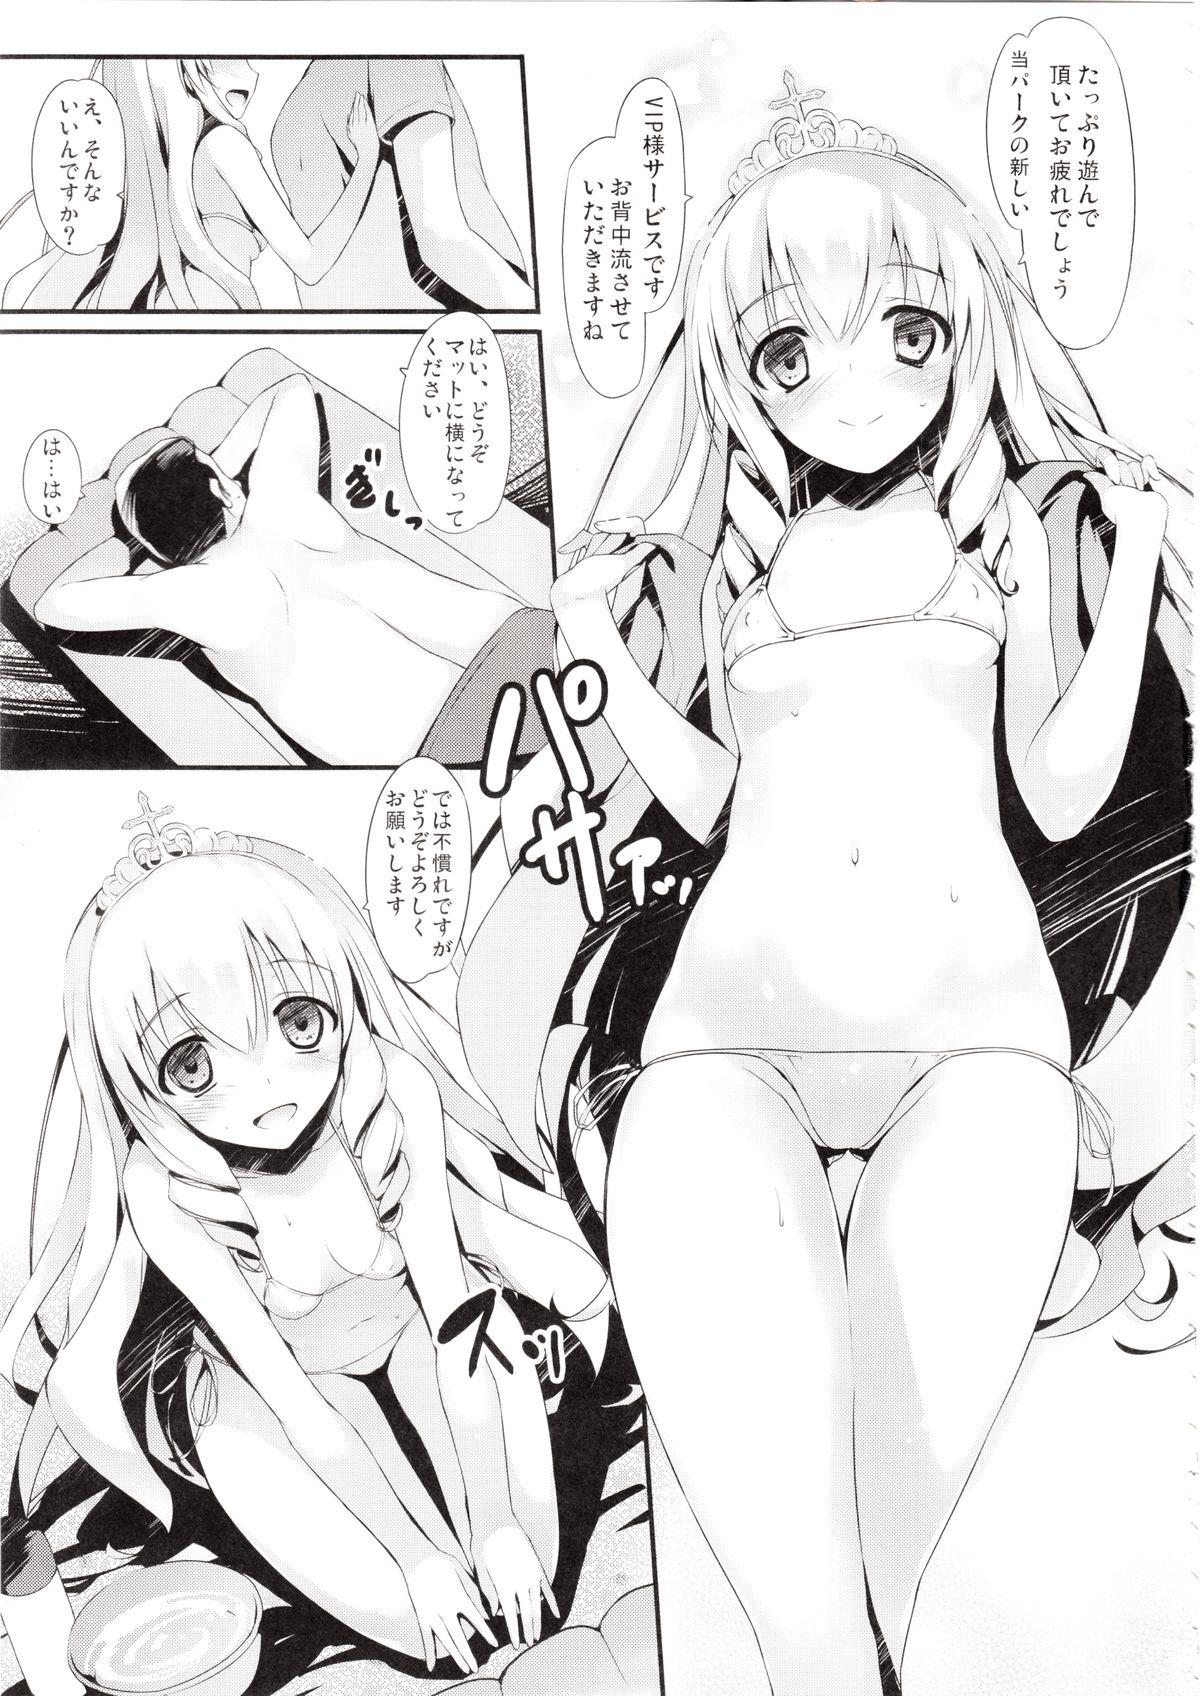 Tites Wellcome to the Sex Park - Amagi brilliant park Perverted - Page 5